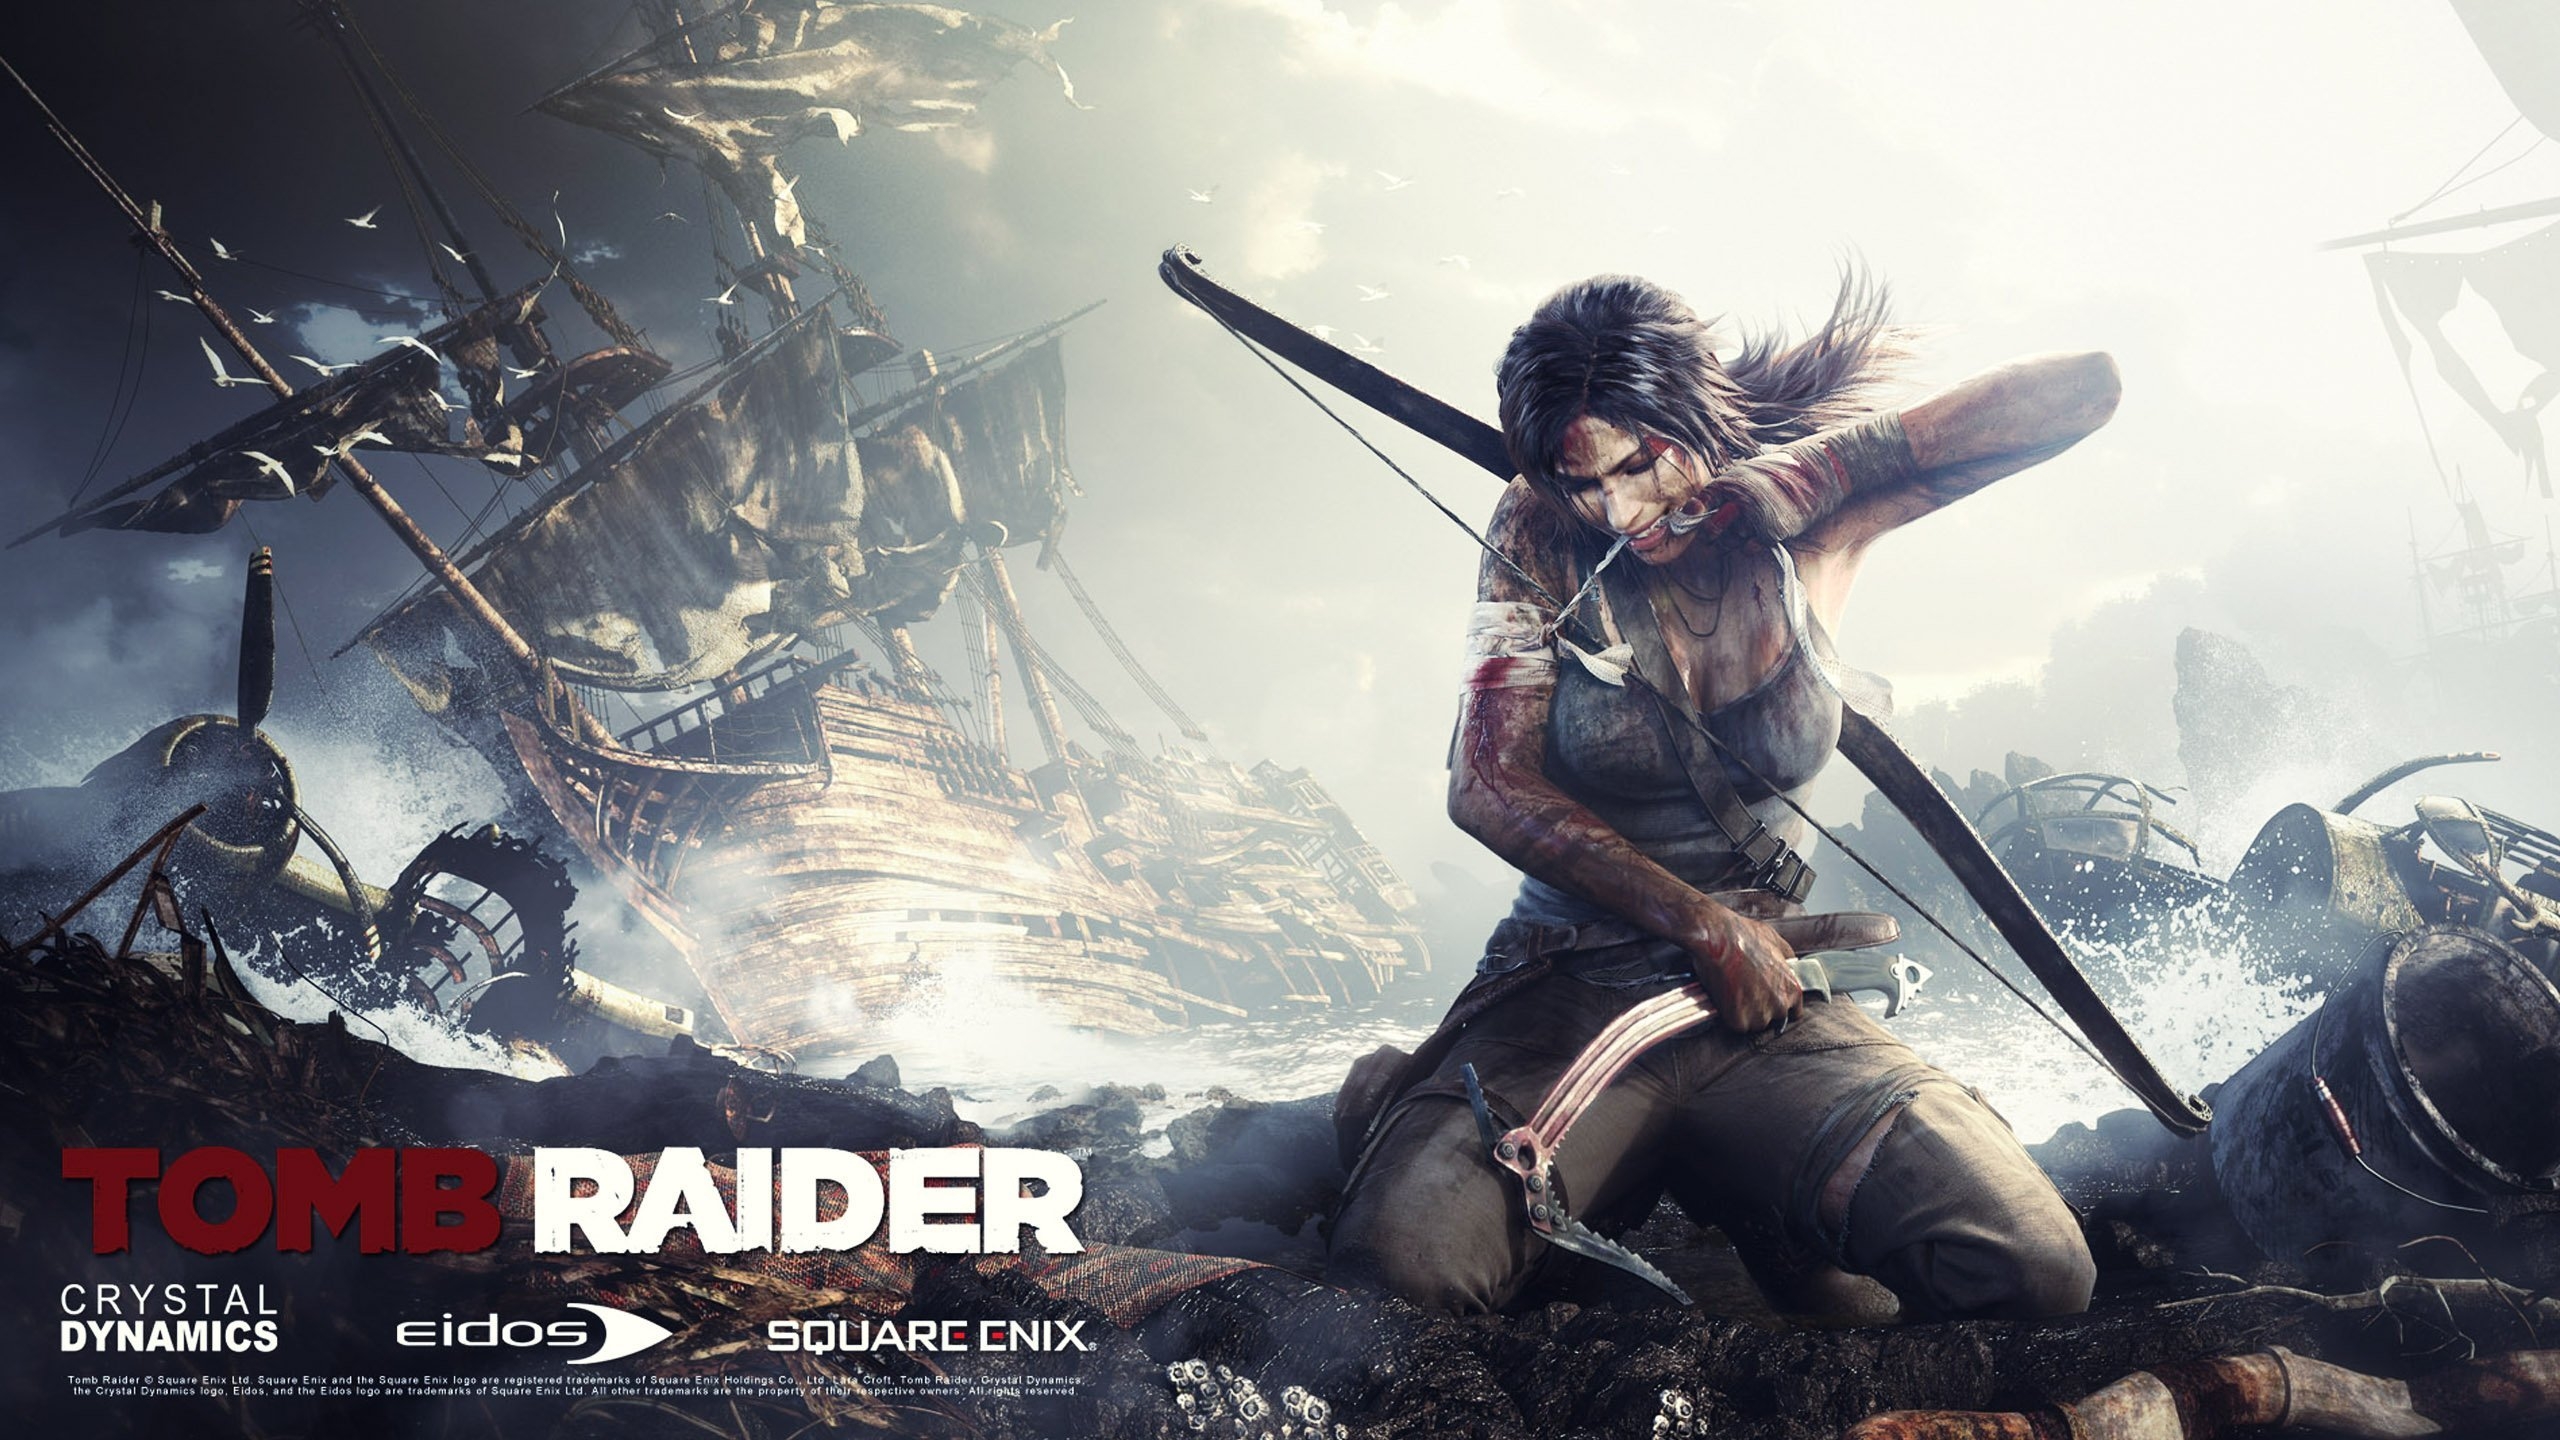 Tomb Raider Weapons Unlocked for 2560x1440 HDTV resolution